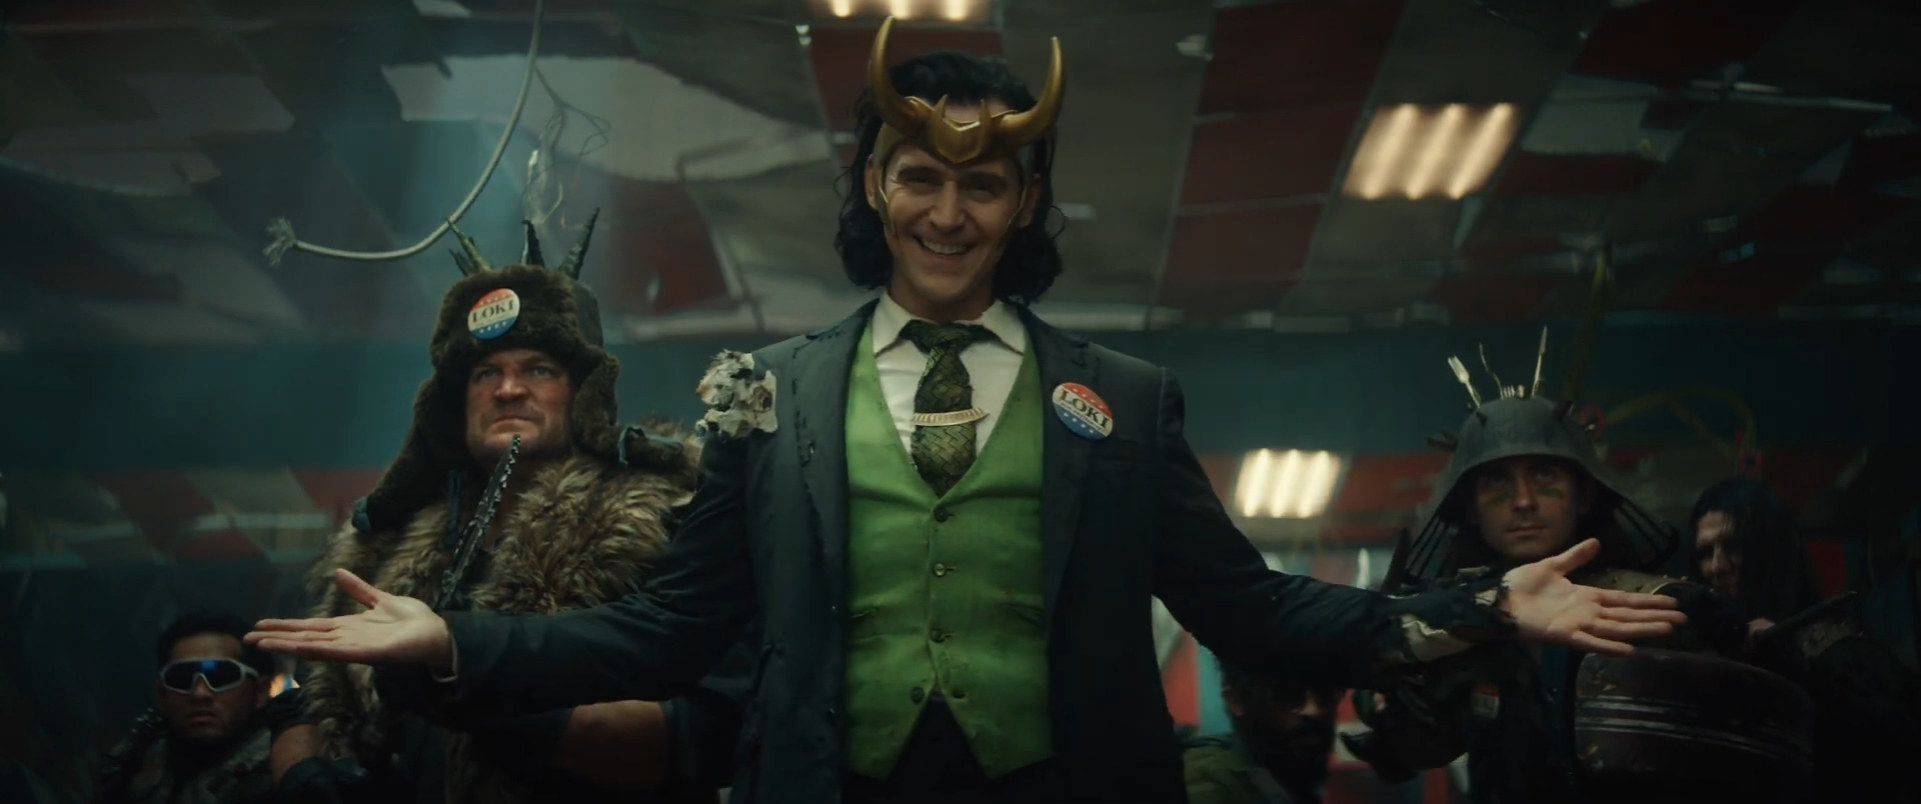 President Loki in a green suit and tie, wearing gold horns and smiling with his arms outstretched, while some of his goons stand behind him wearing horned hats